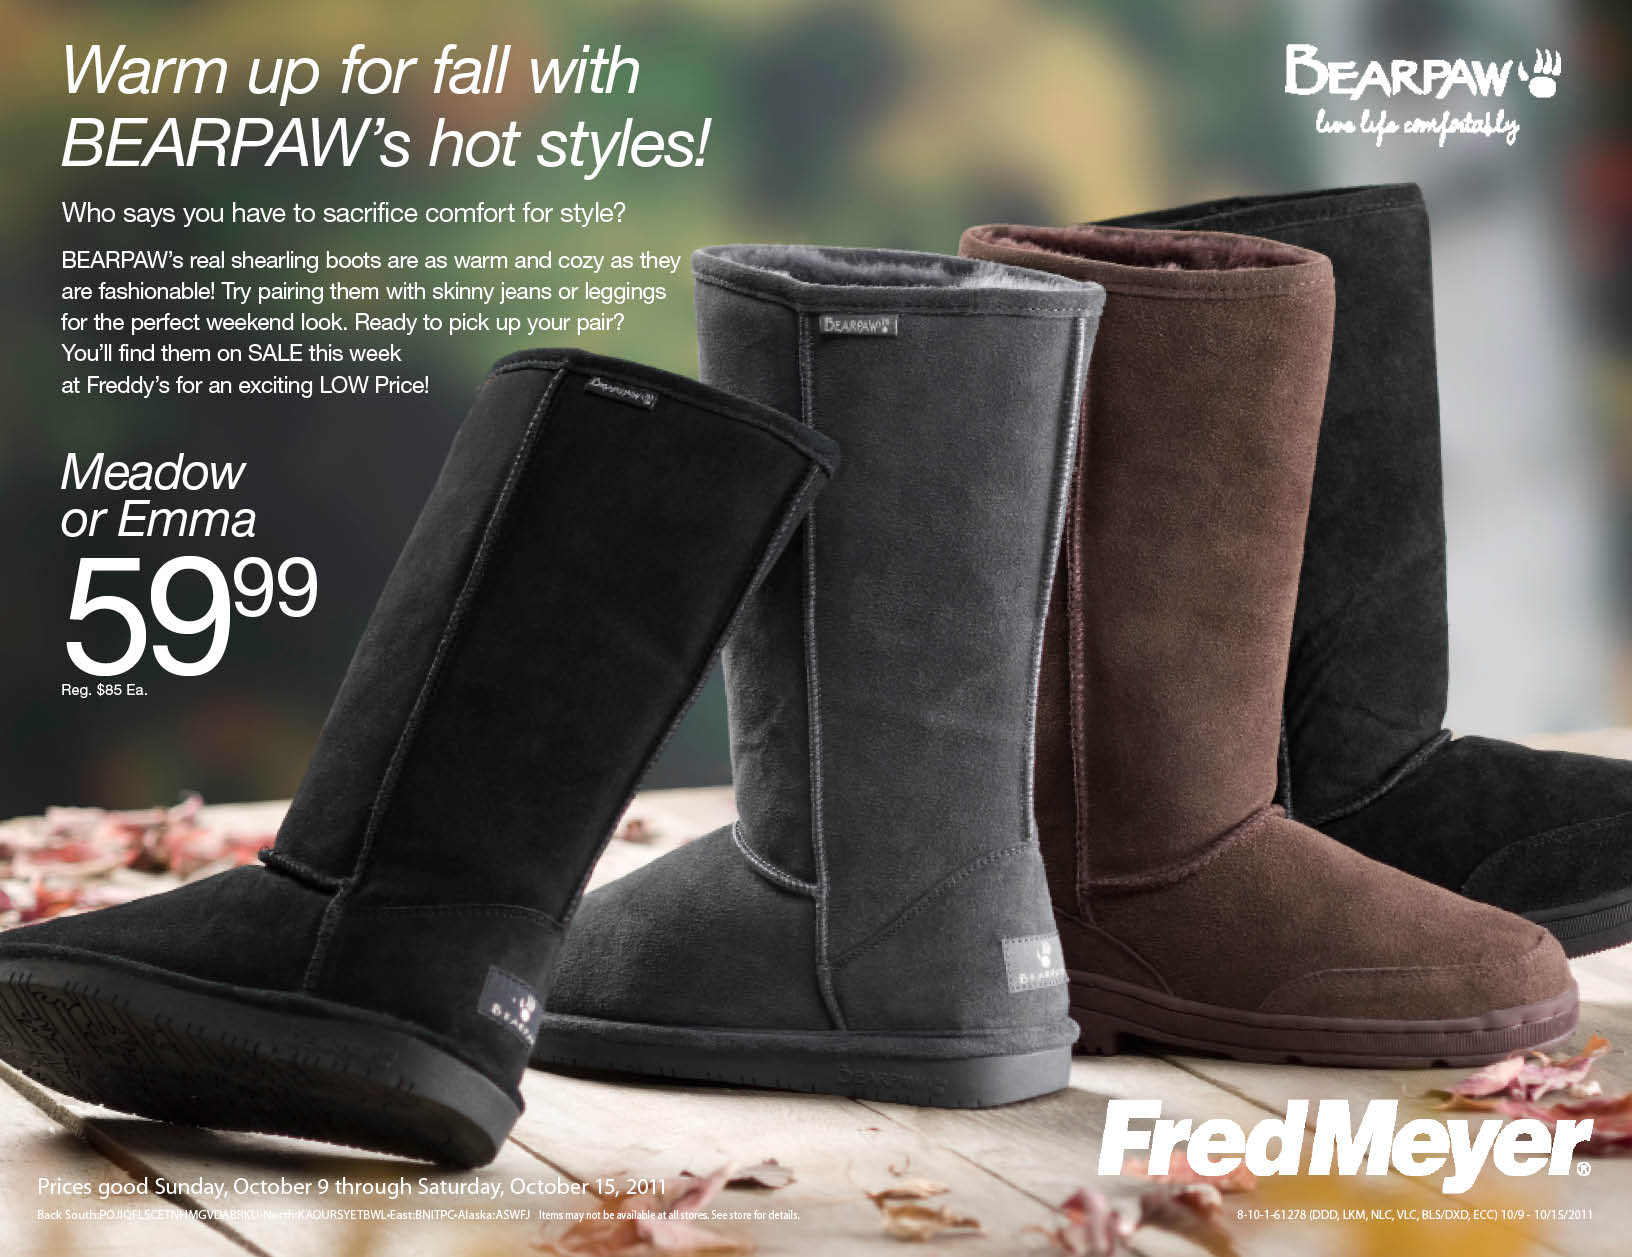 fred meyer bearpaw boots